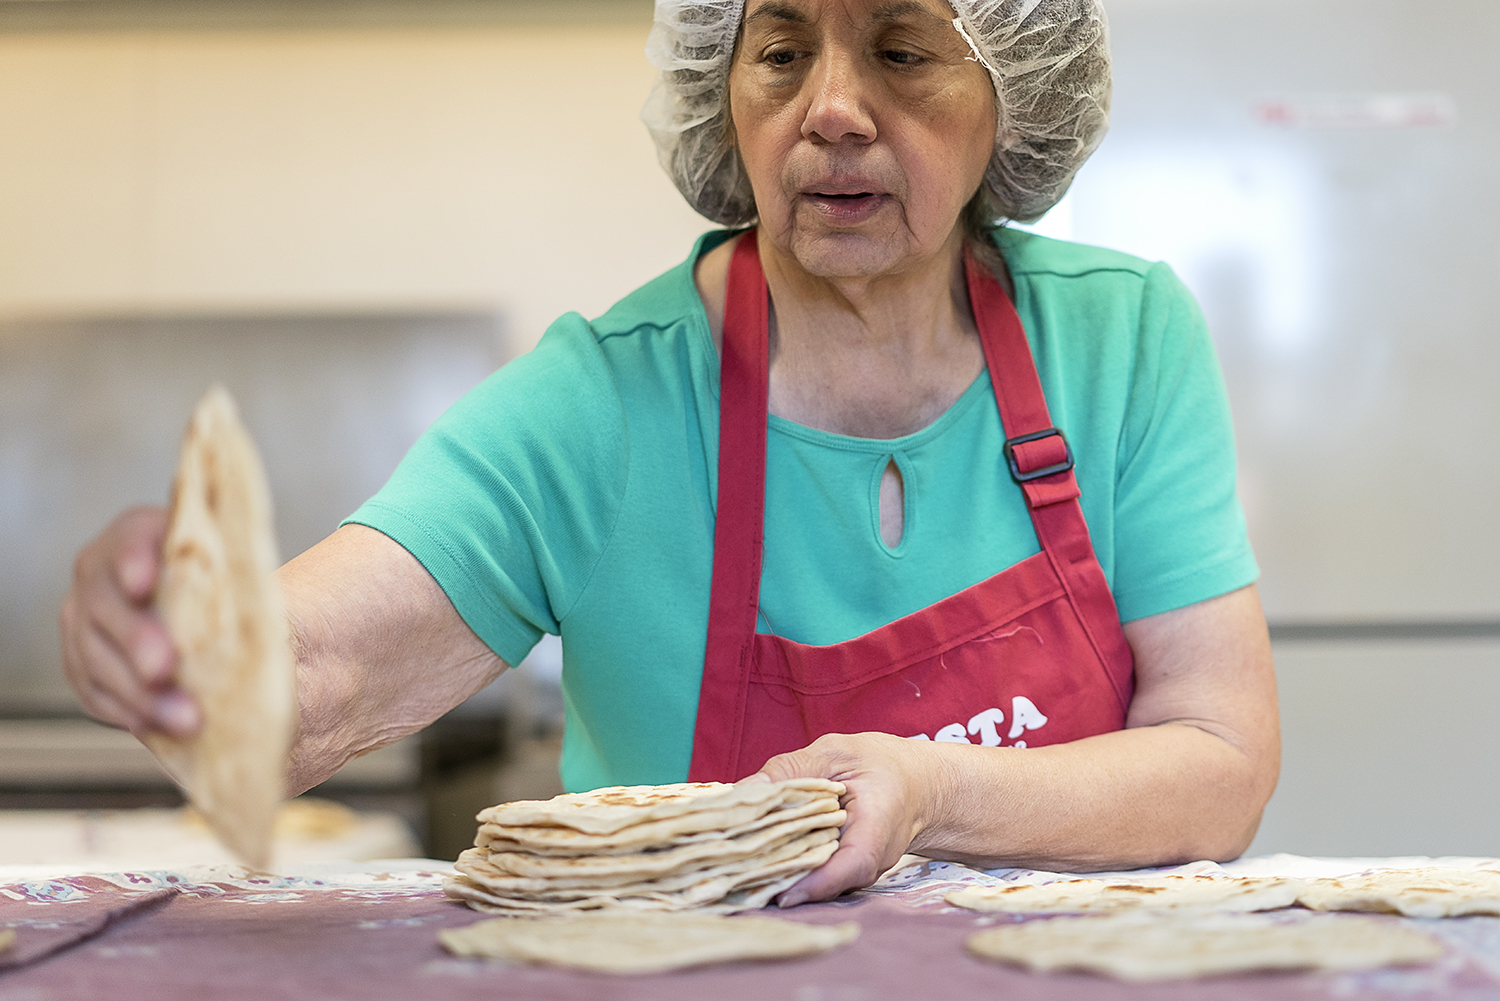 Flint resident Connie Rosas, 72, collects and stacks tortillas to be packaged after they have cooled.